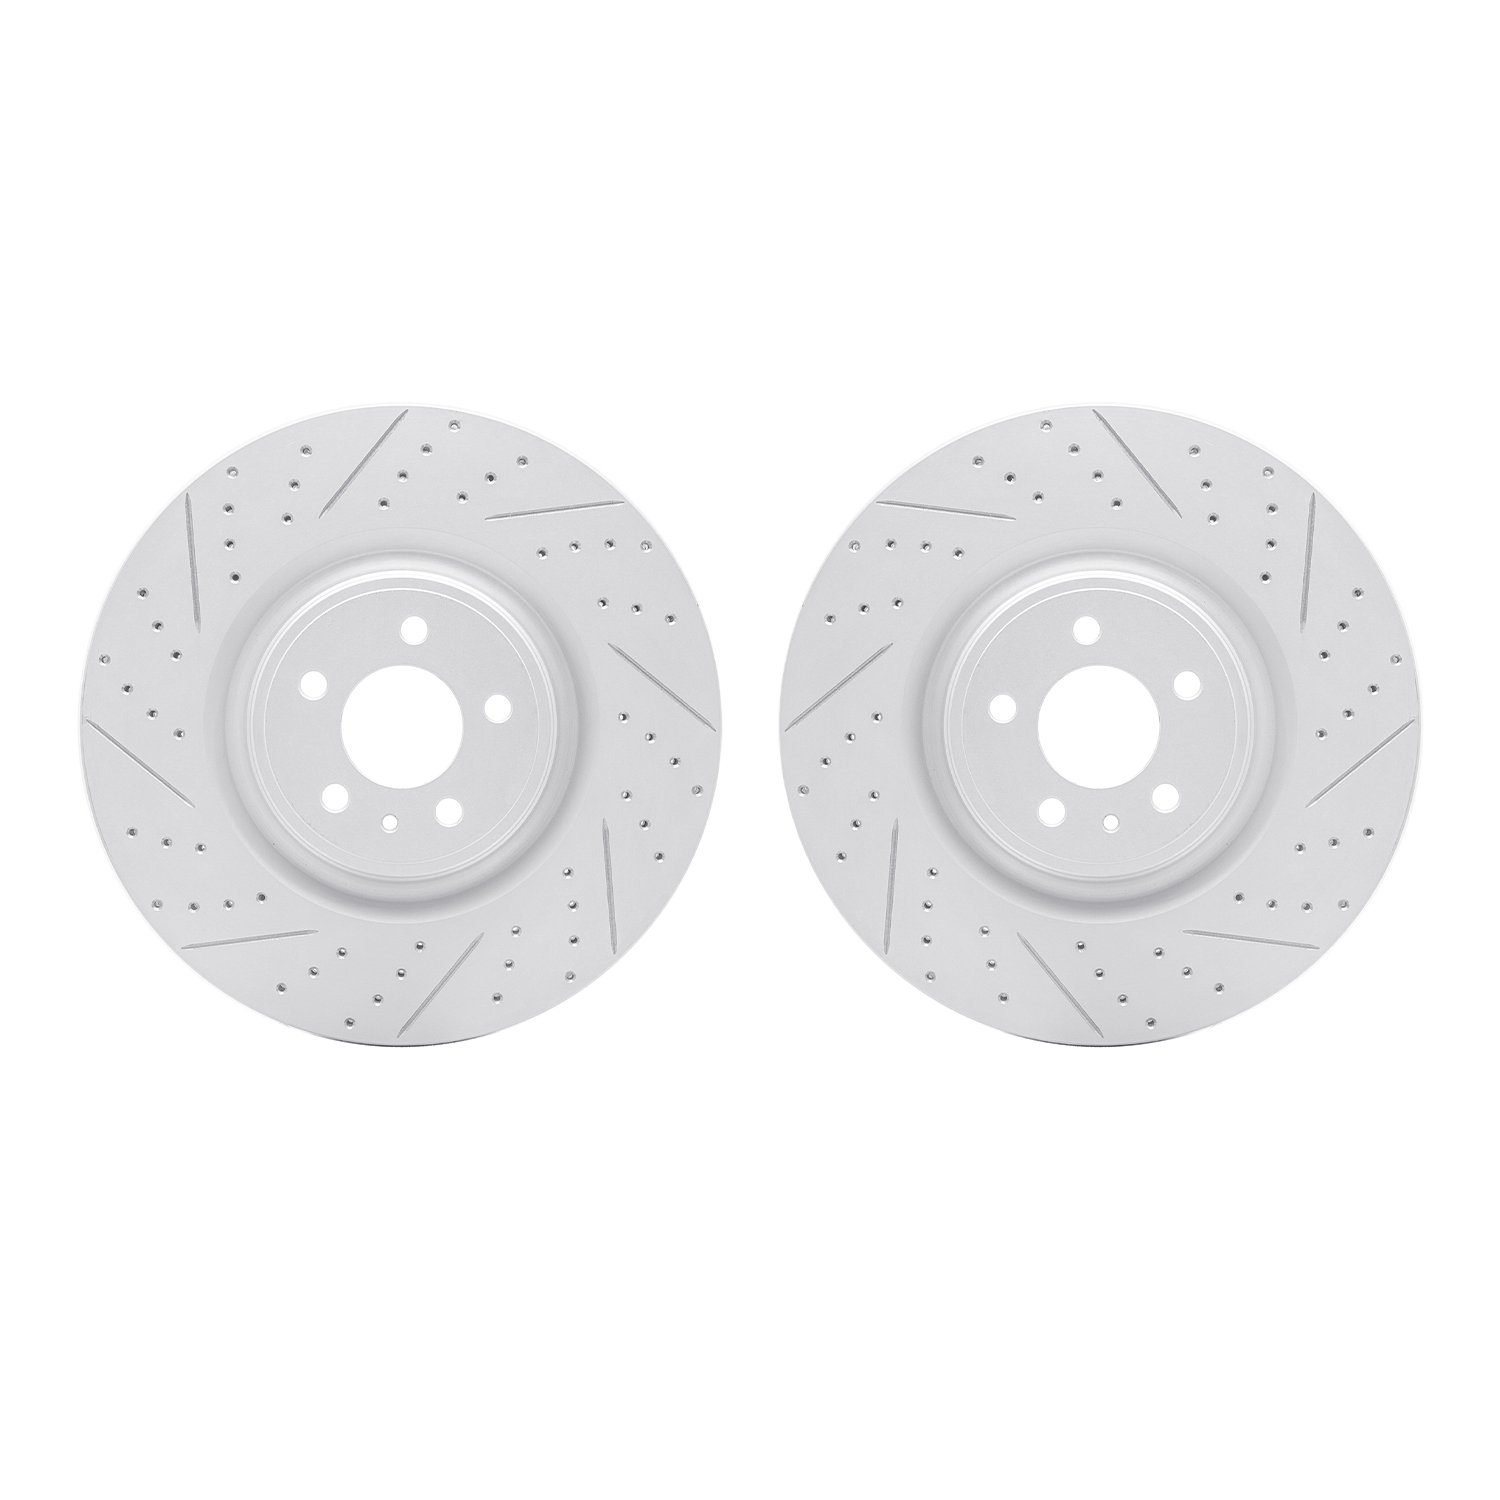 2002-54098 Geoperformance Drilled/Slotted Brake Rotors, 2013-2014 Ford/Lincoln/Mercury/Mazda, Position: Front